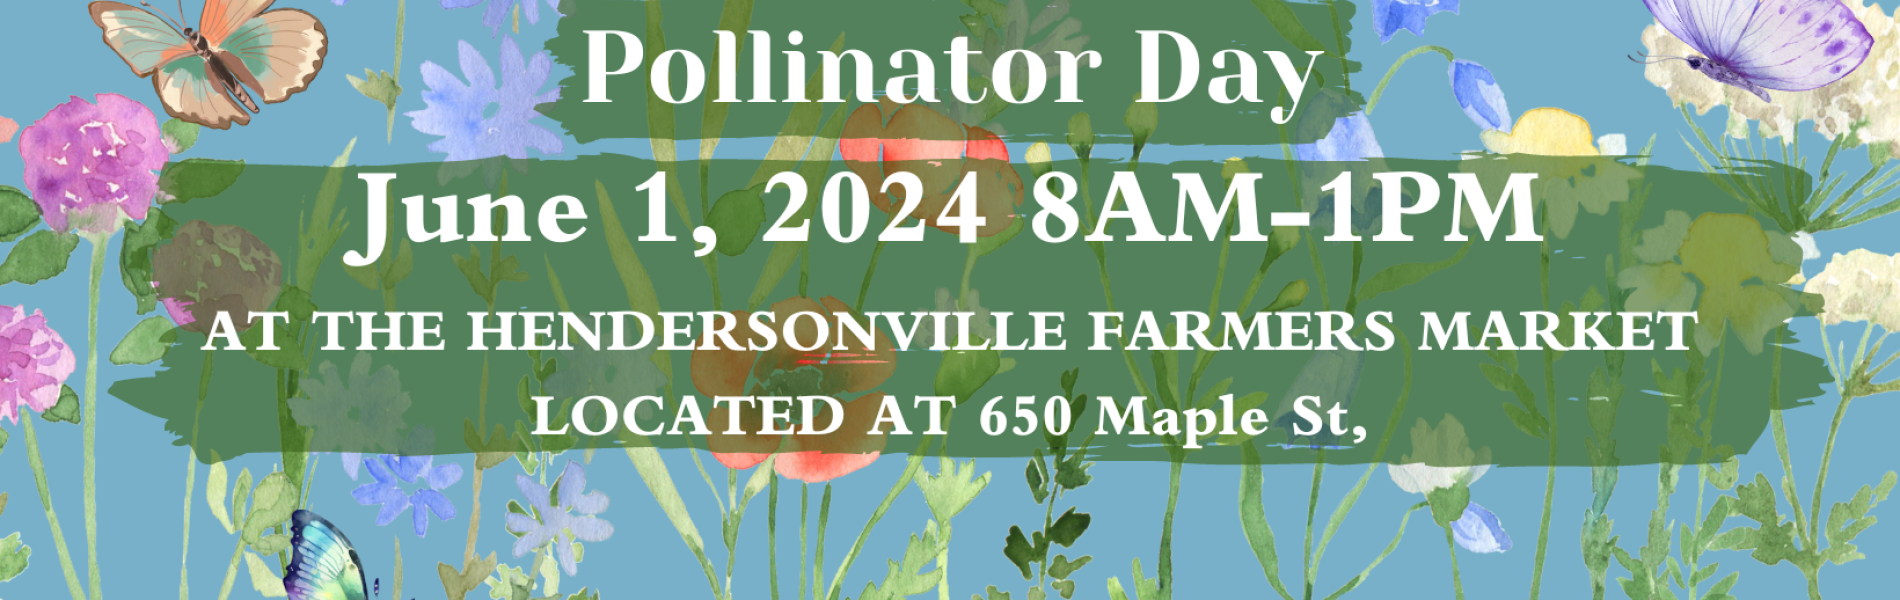 Pollinator Day at the Hendersonville Farmers Market